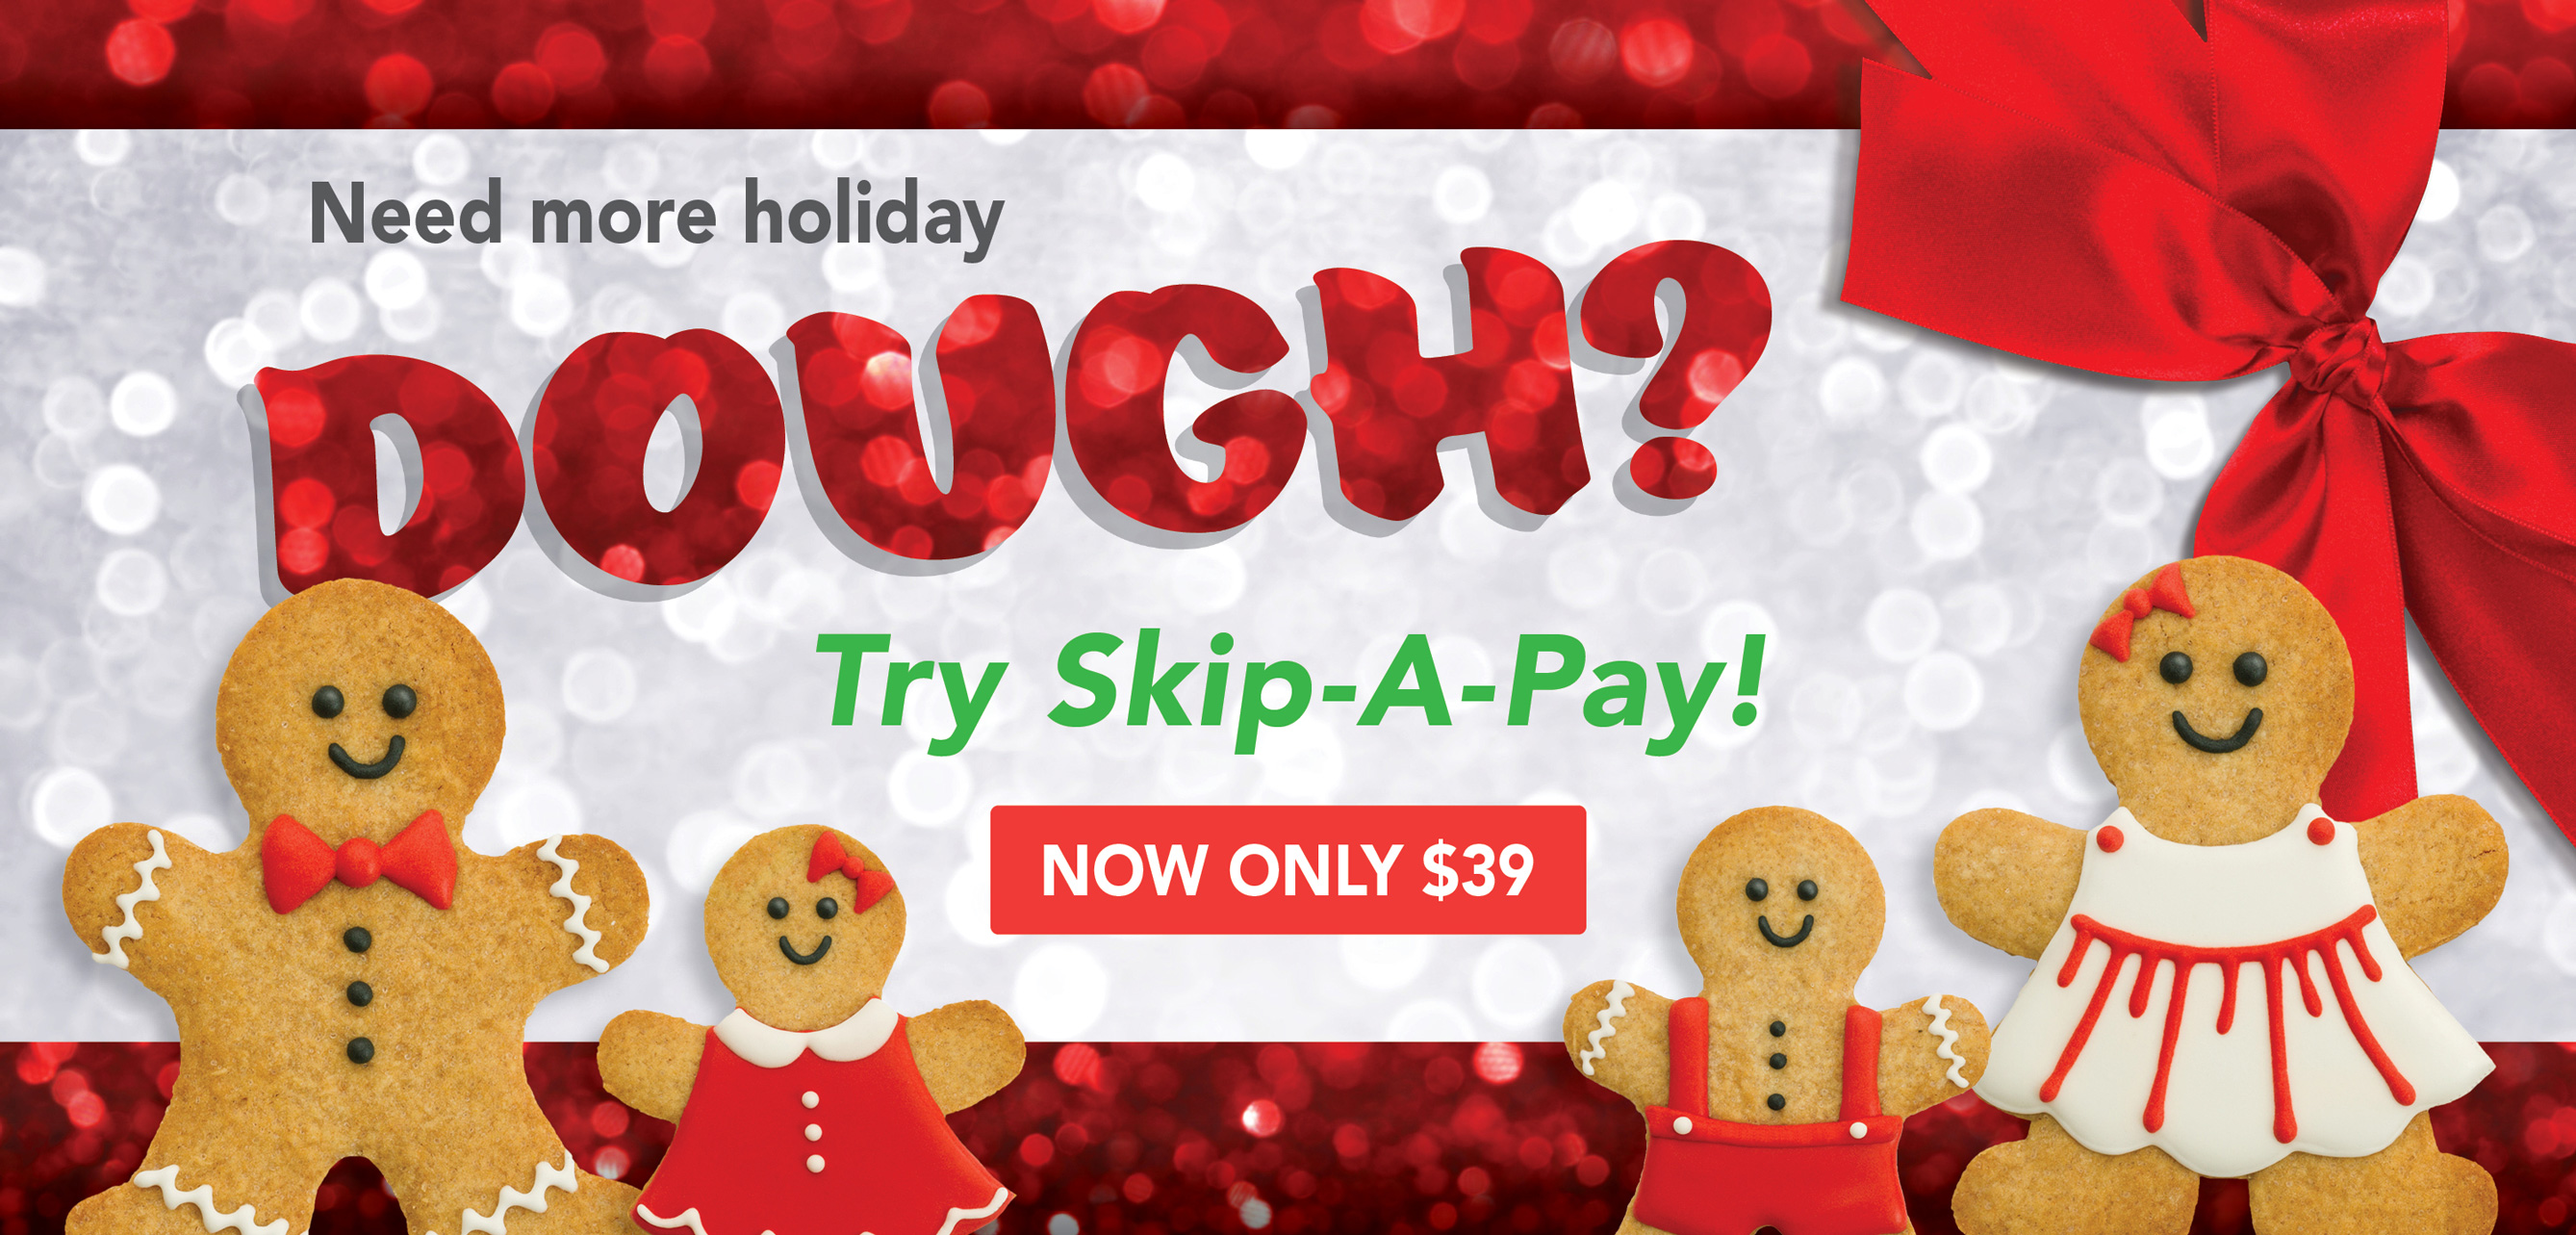 Need more holiday dough? Try Skip-A-Pay! Now Only $39